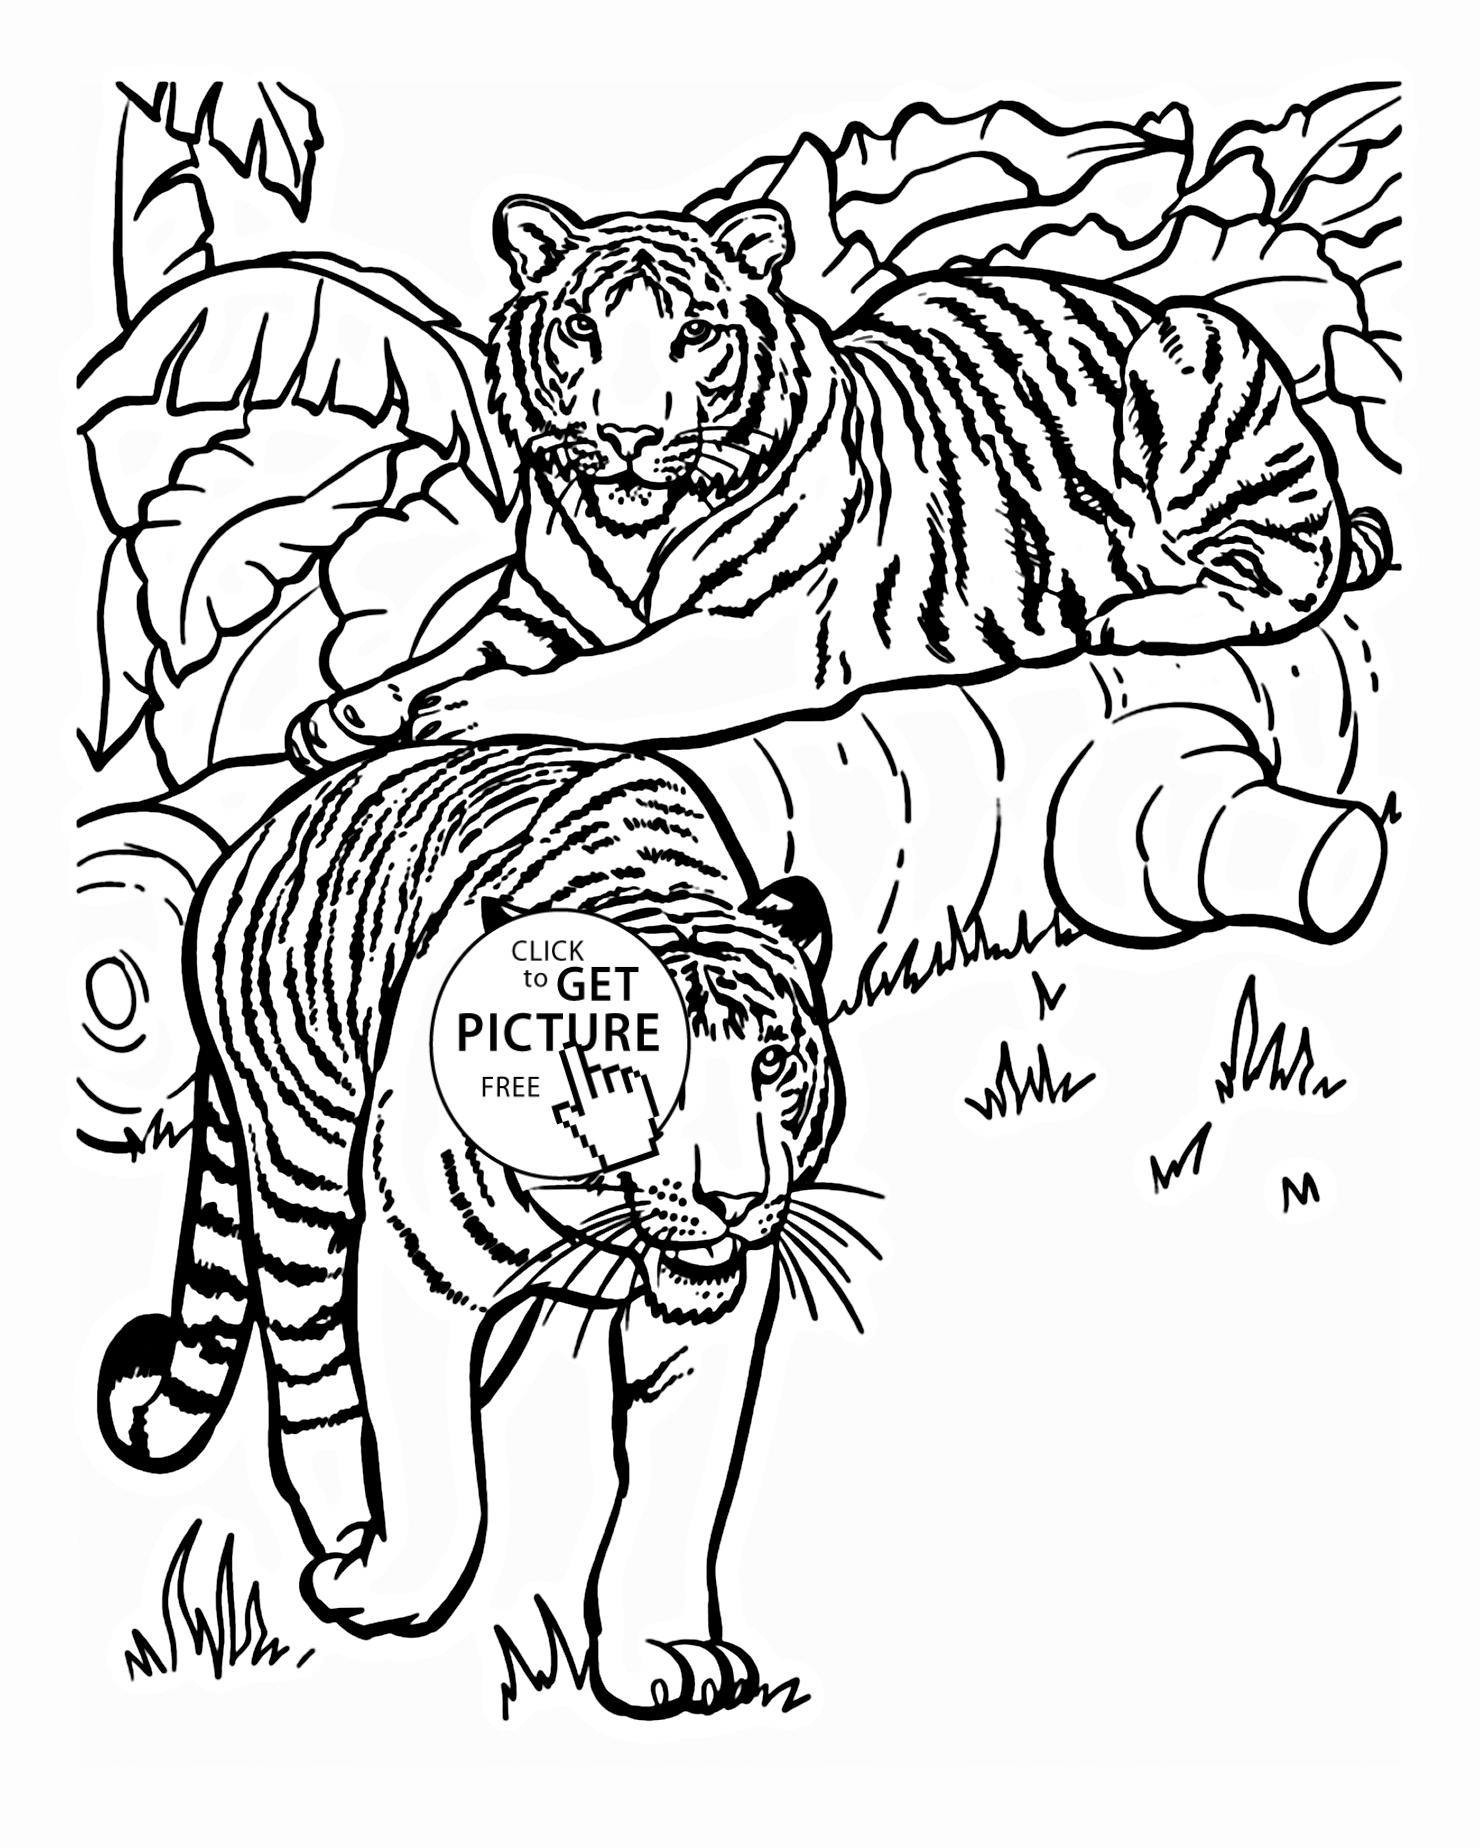 Tigers animal coloring page for kids, animal coloring pages ...